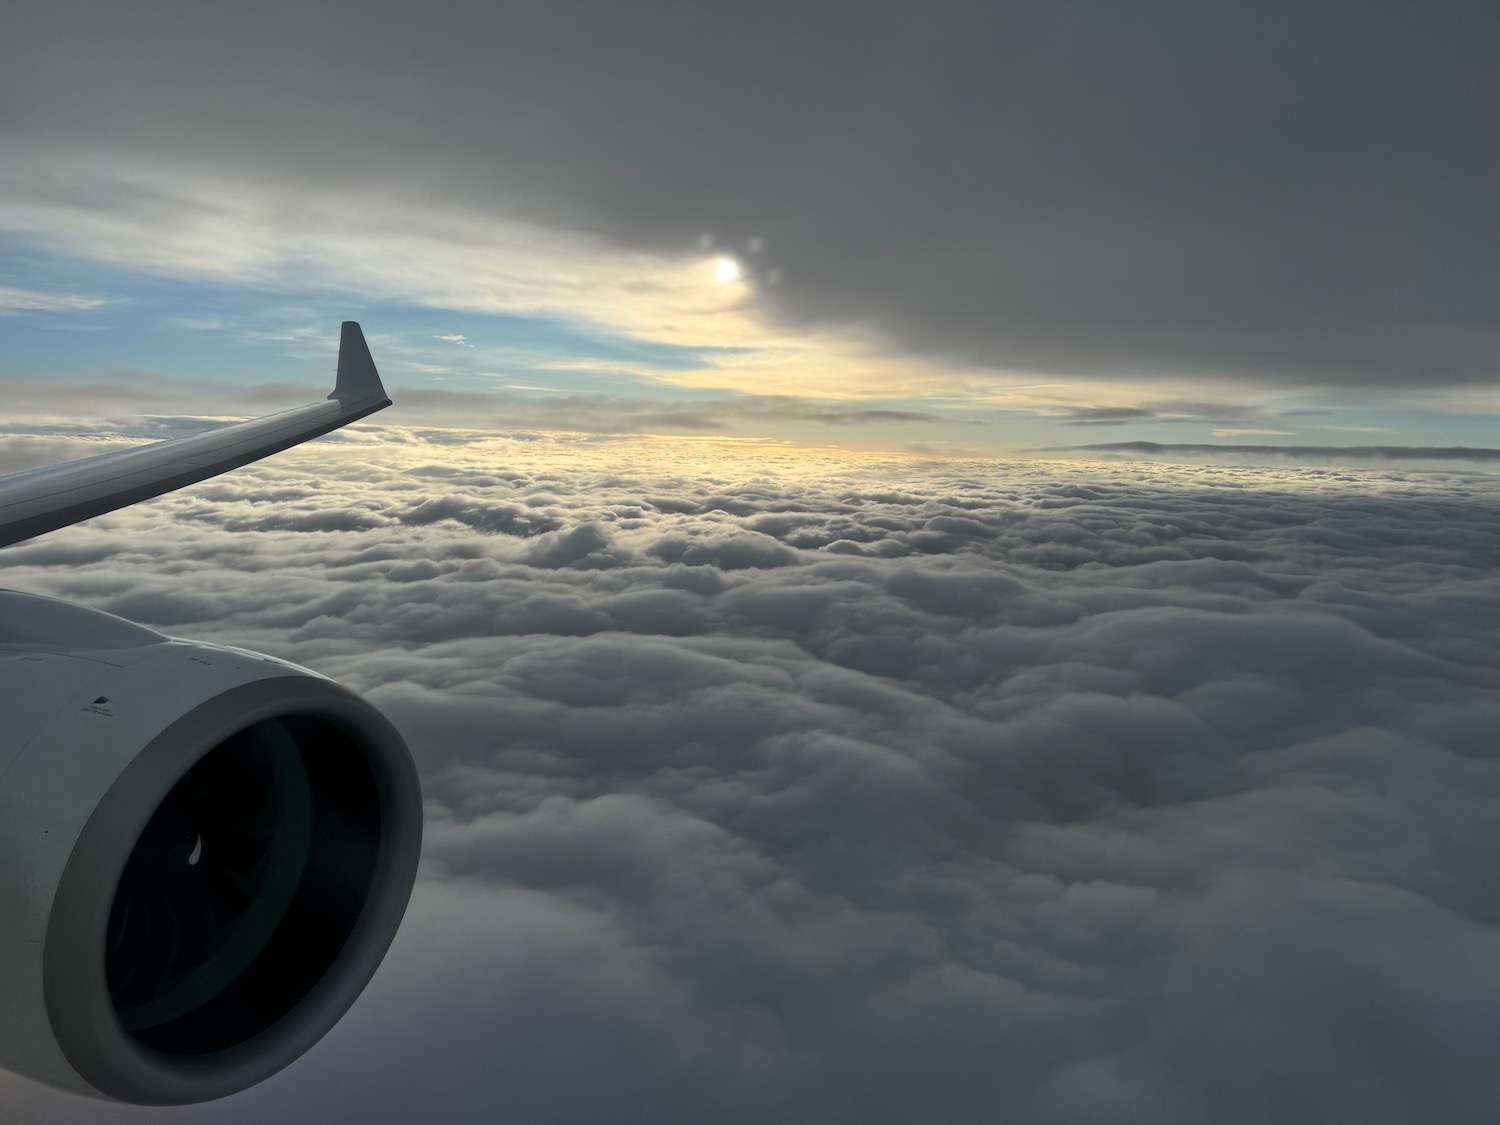 an airplane wing and engine above clouds